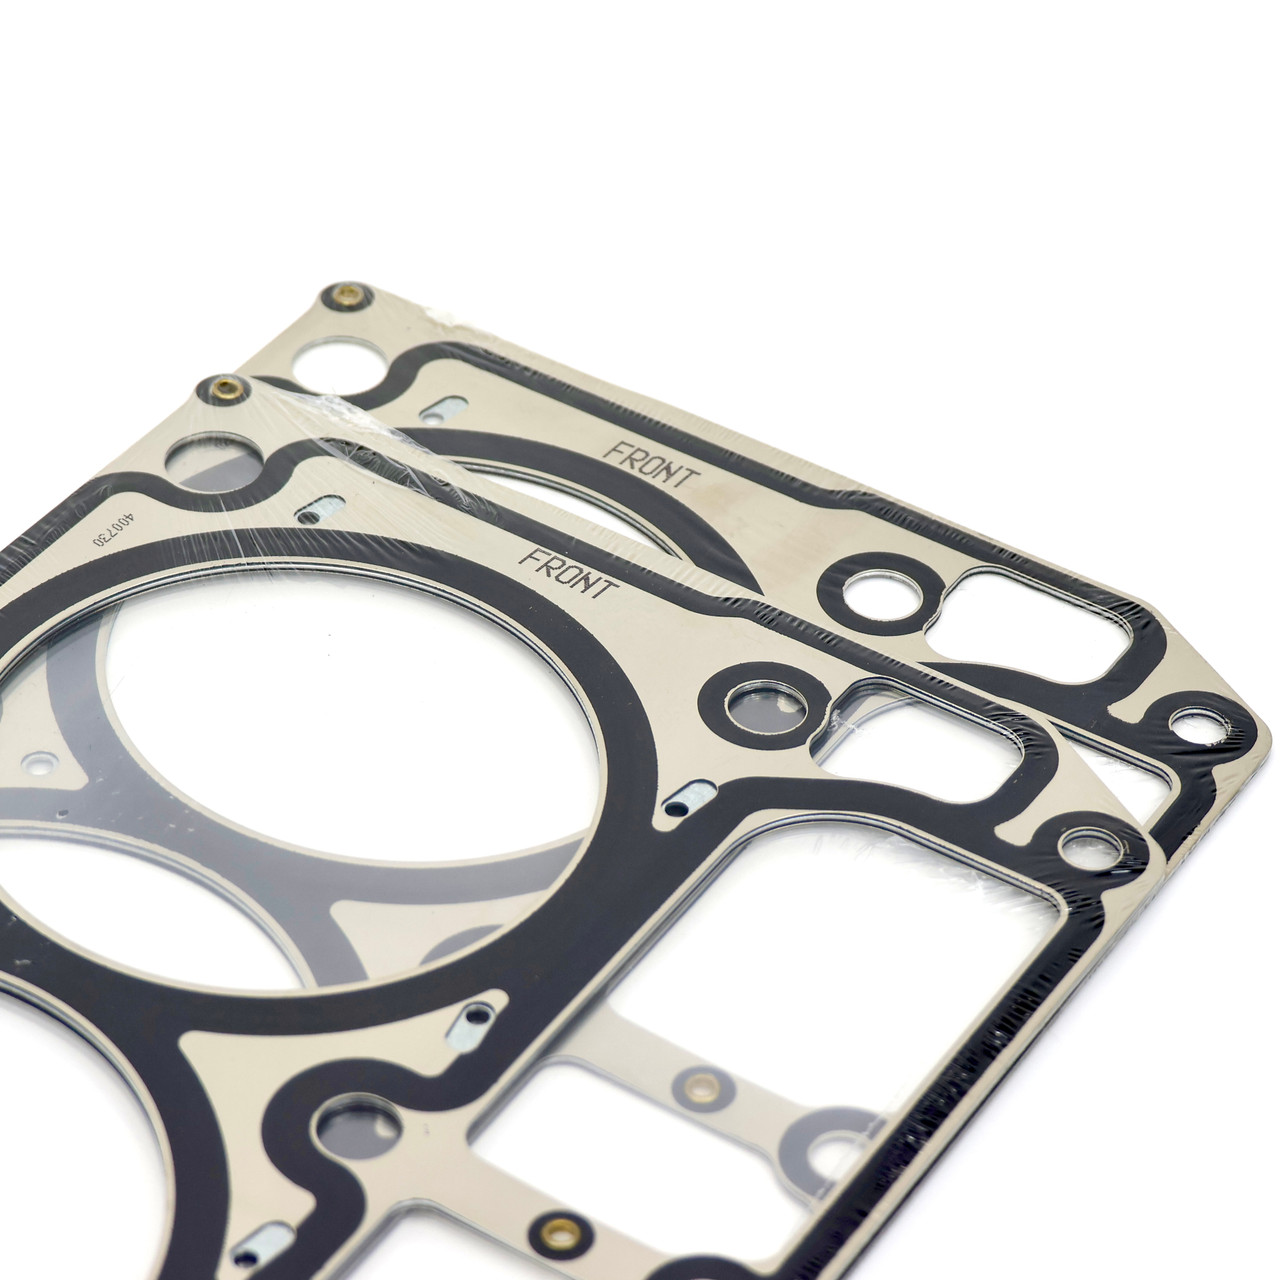 MLS Head Gasket for early Notched LS1 and LS Truck Heads 4.8L 5.3L 5.7L 806 853 862